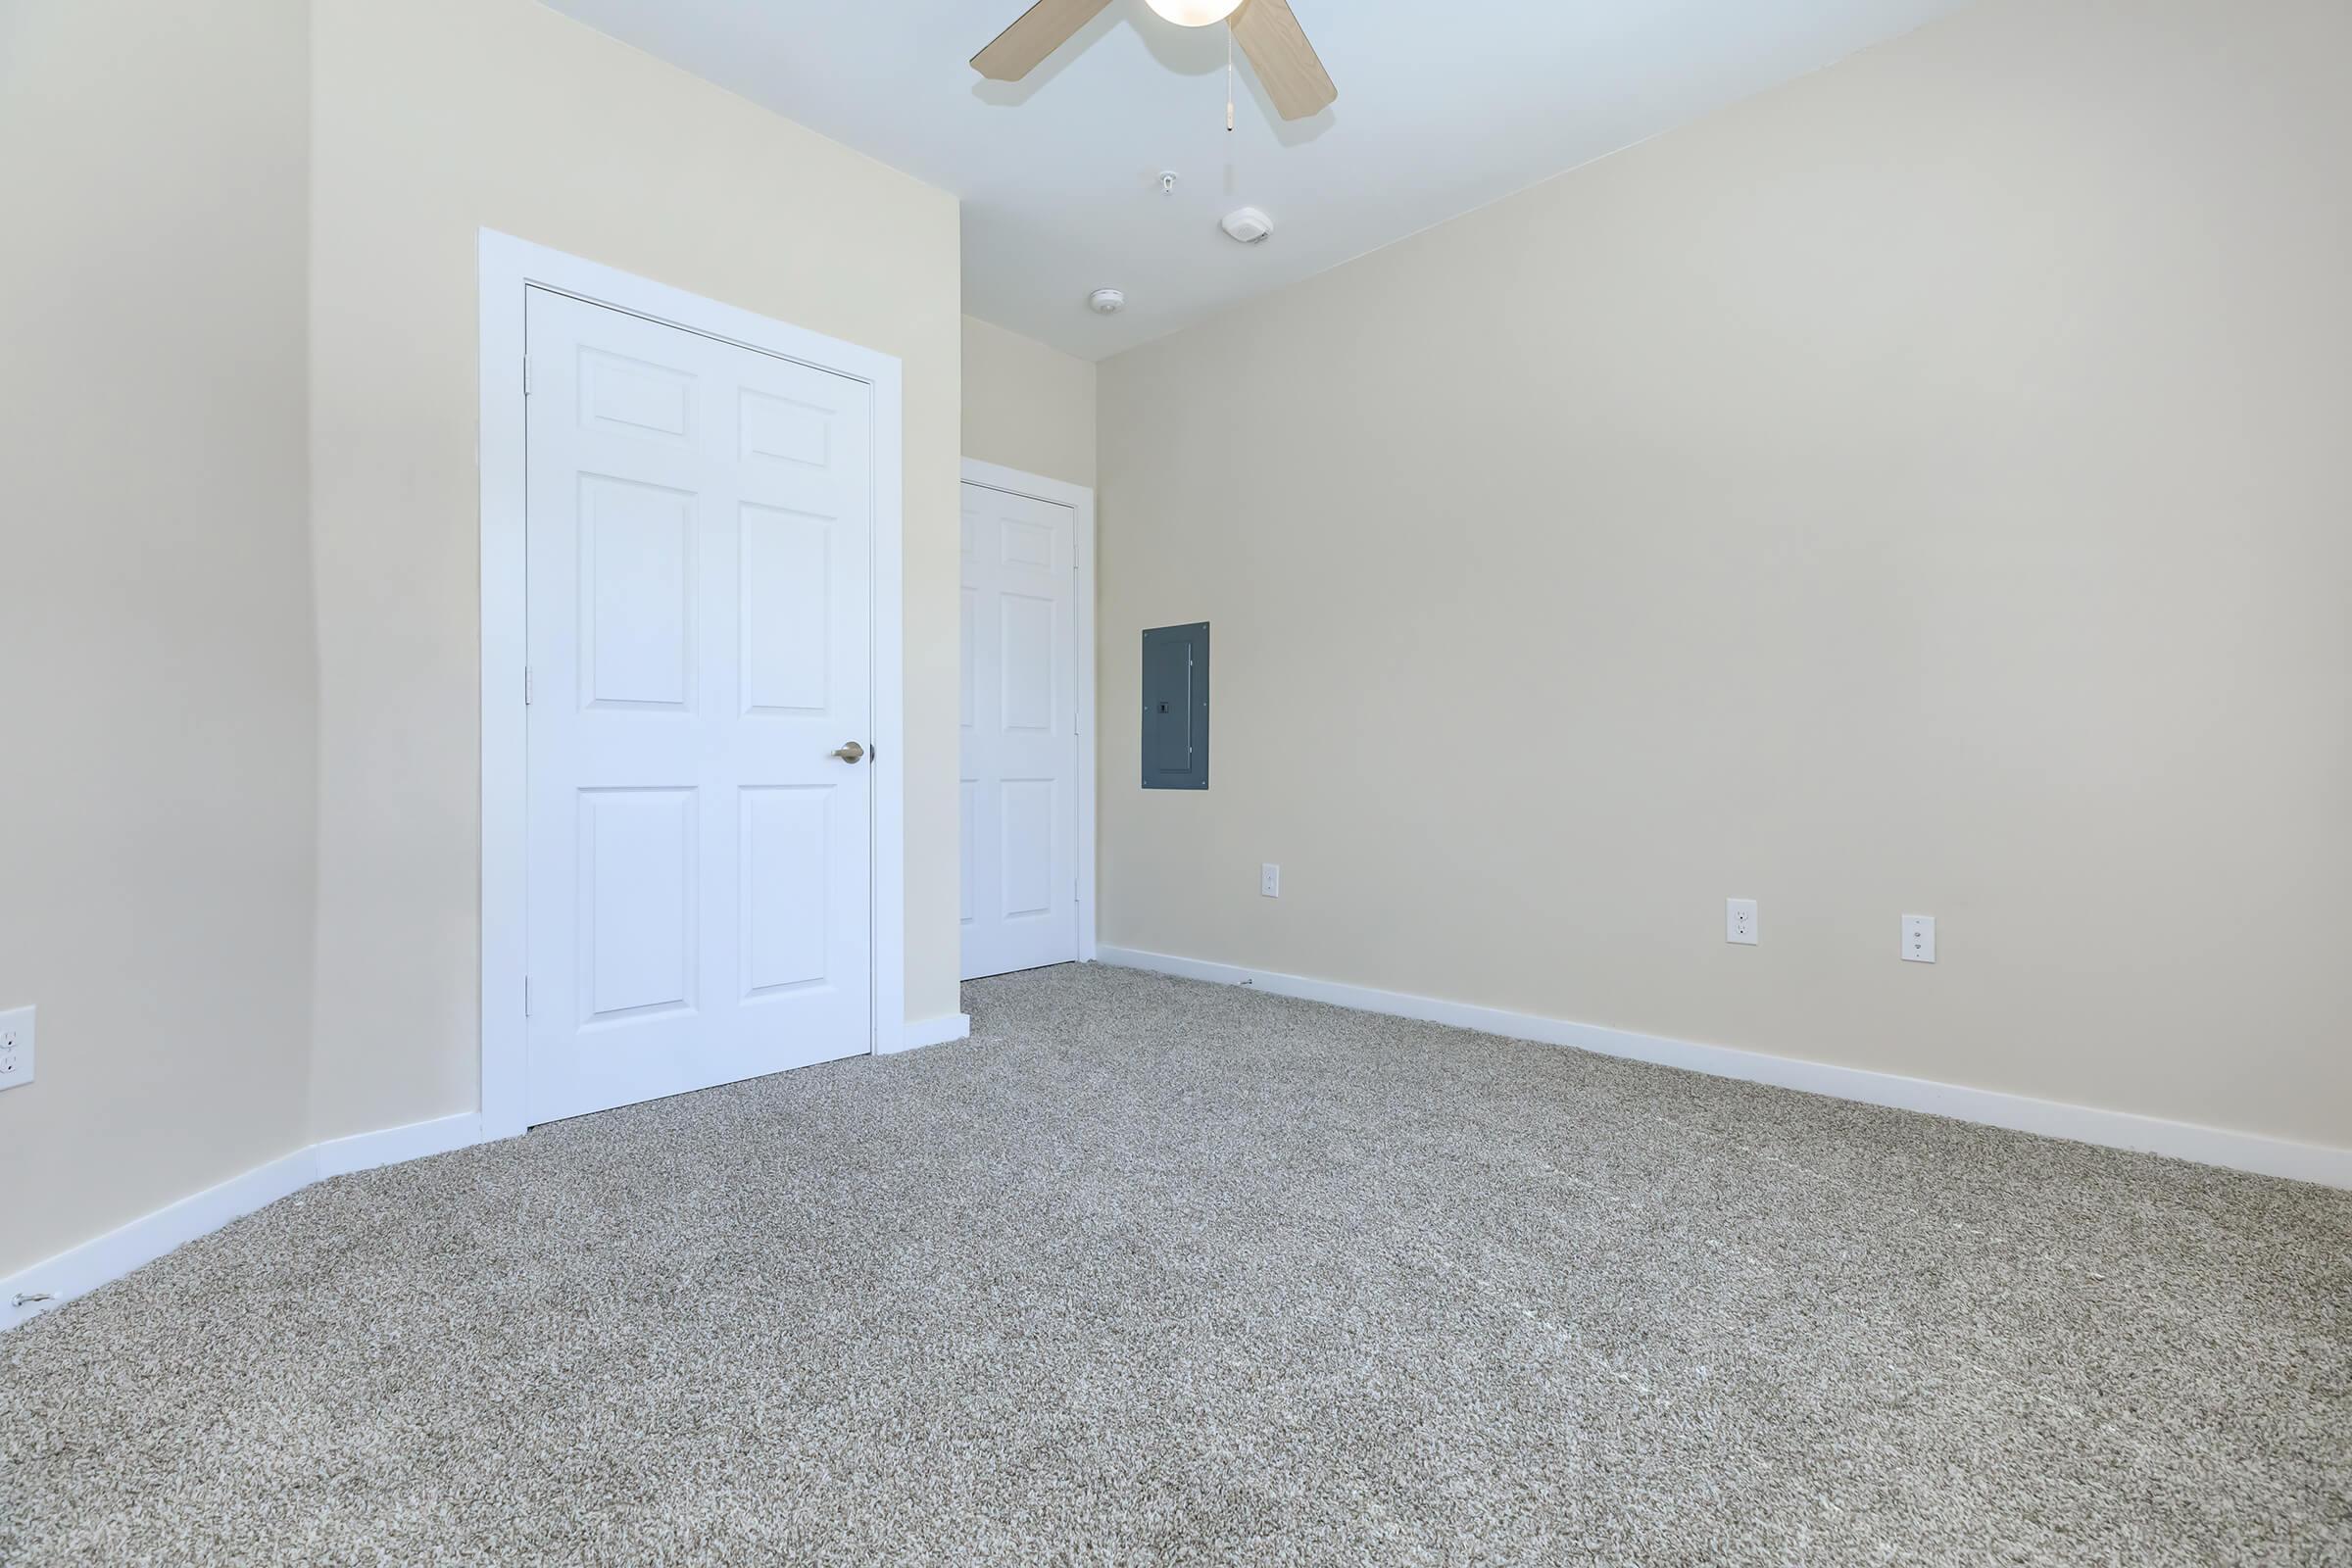 Apartments in Leander - Hills at Leander Spacious Bedroom with an Expansive Closet, Plush Carpeting, and Many More Great Amenities